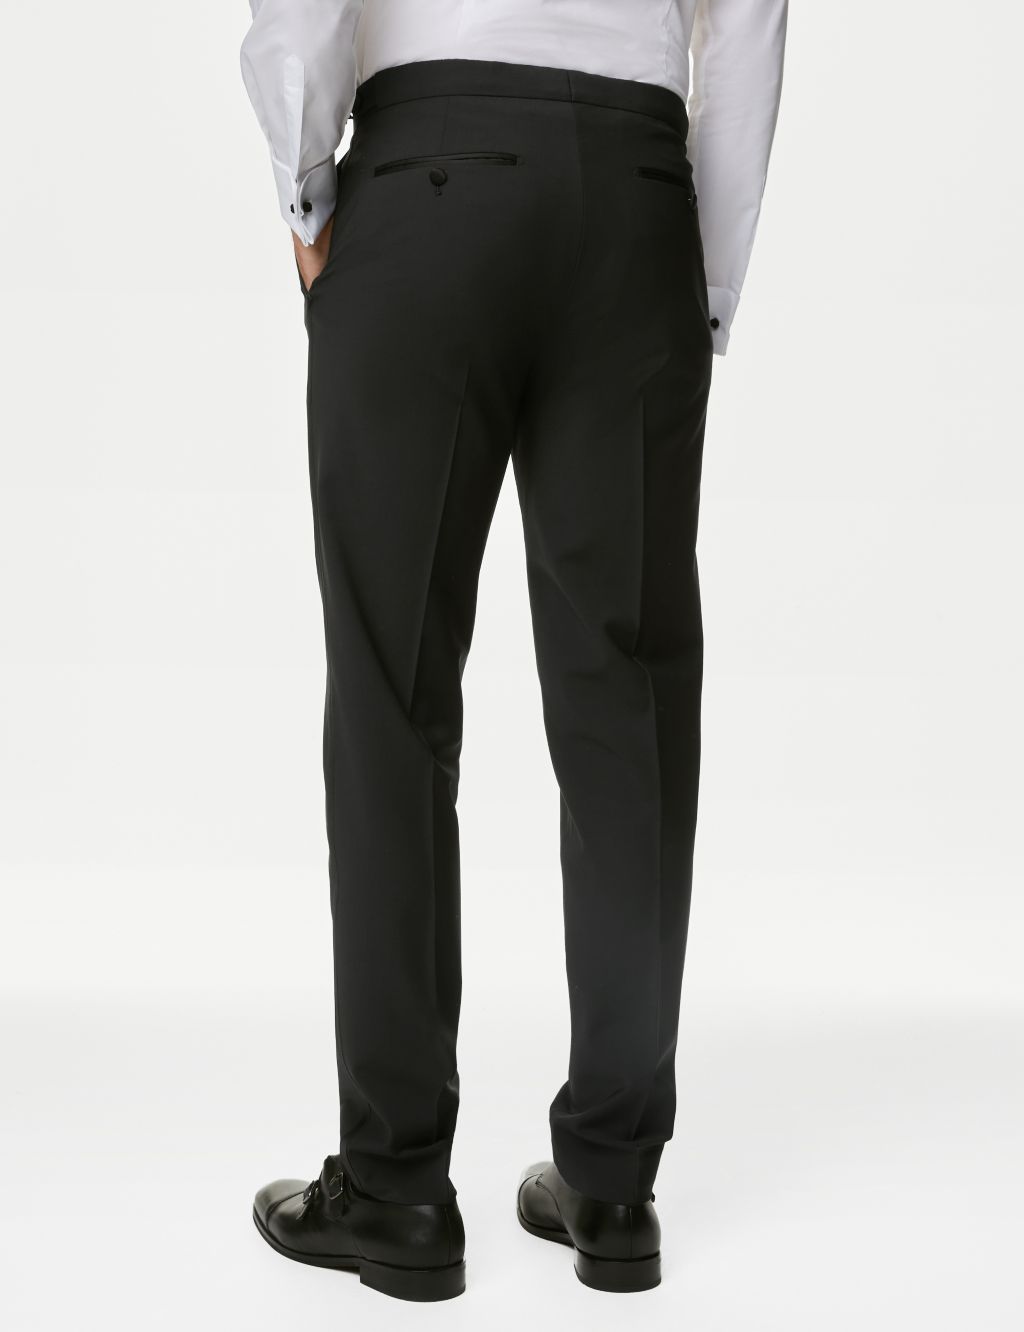 The Ultimate Tailored Fit Tuxedo Suit image 5